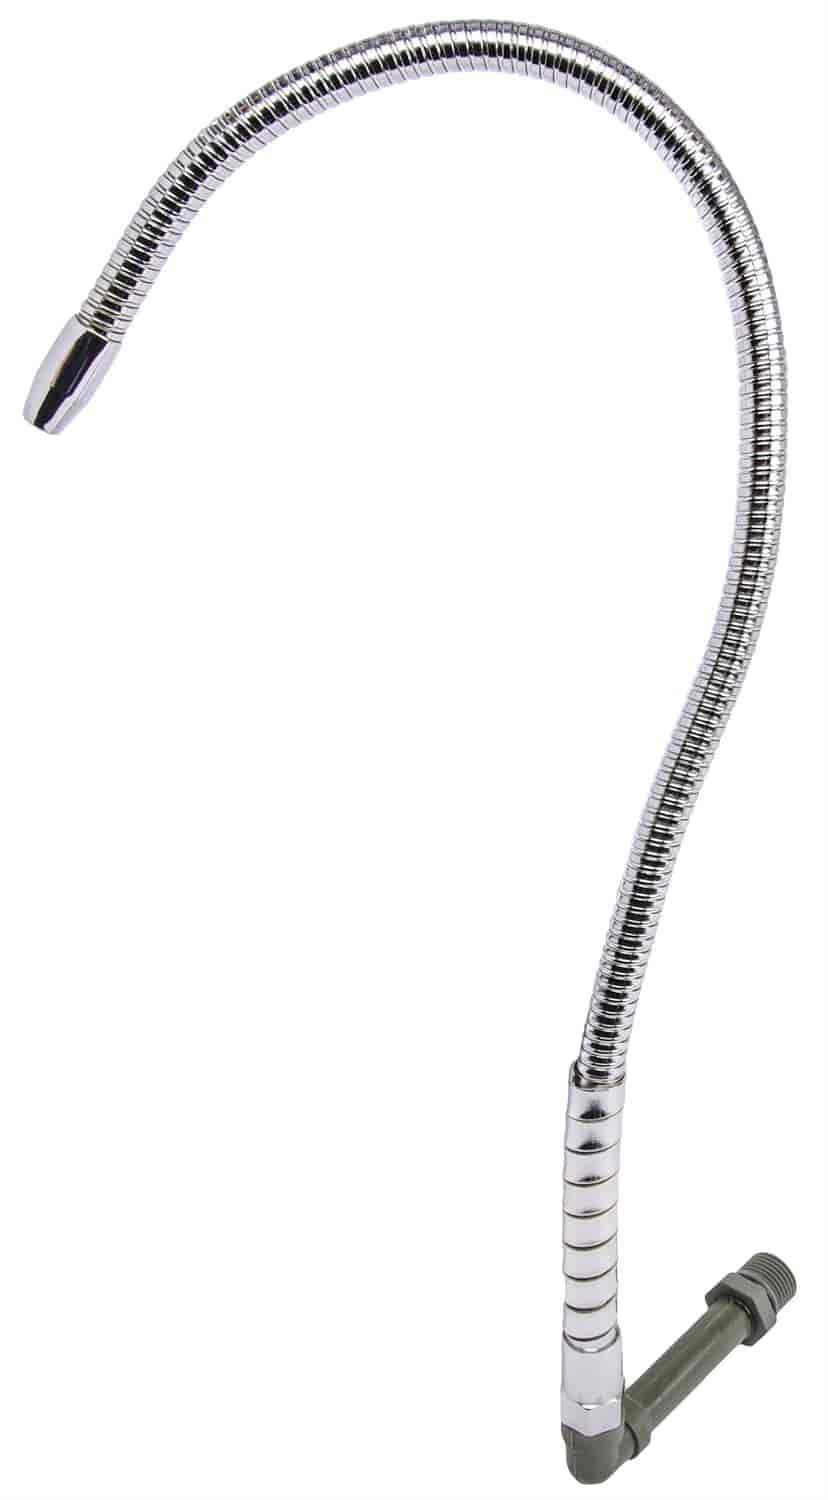 JEGS 81525-3 Replacement Metal Flex Hose For JEGS Parts Washer 